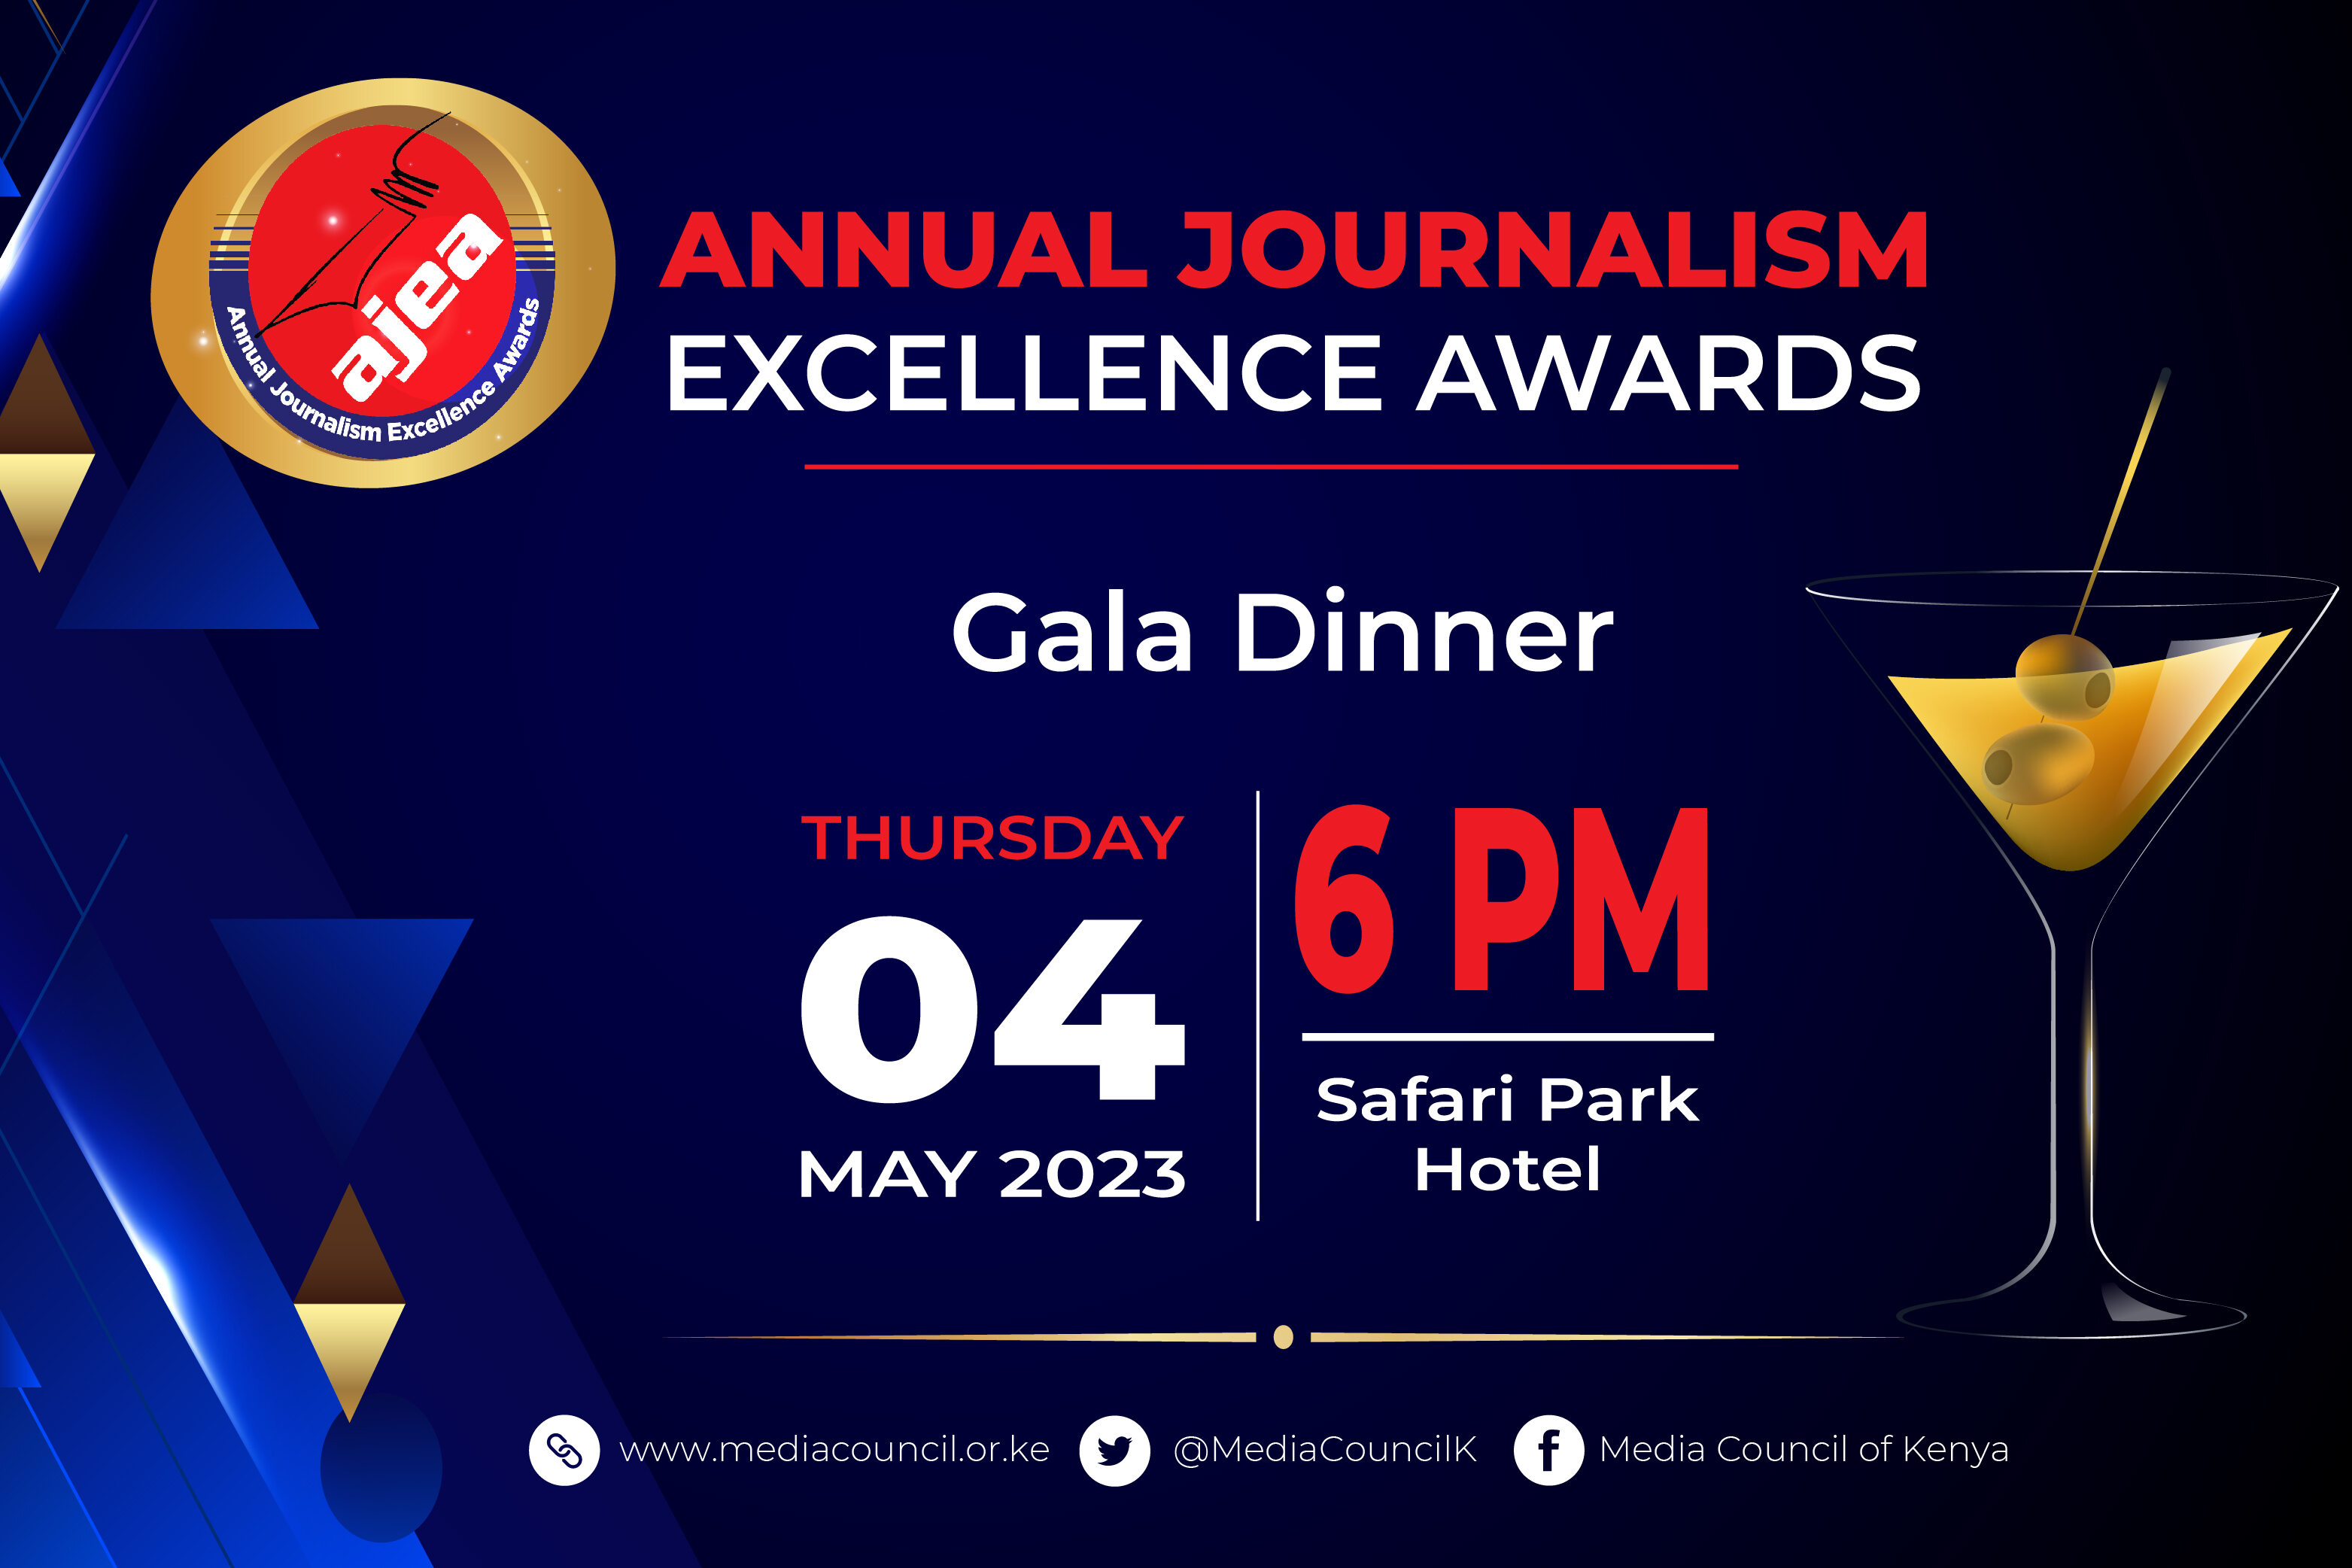 Annual Journalism Excellence Awards